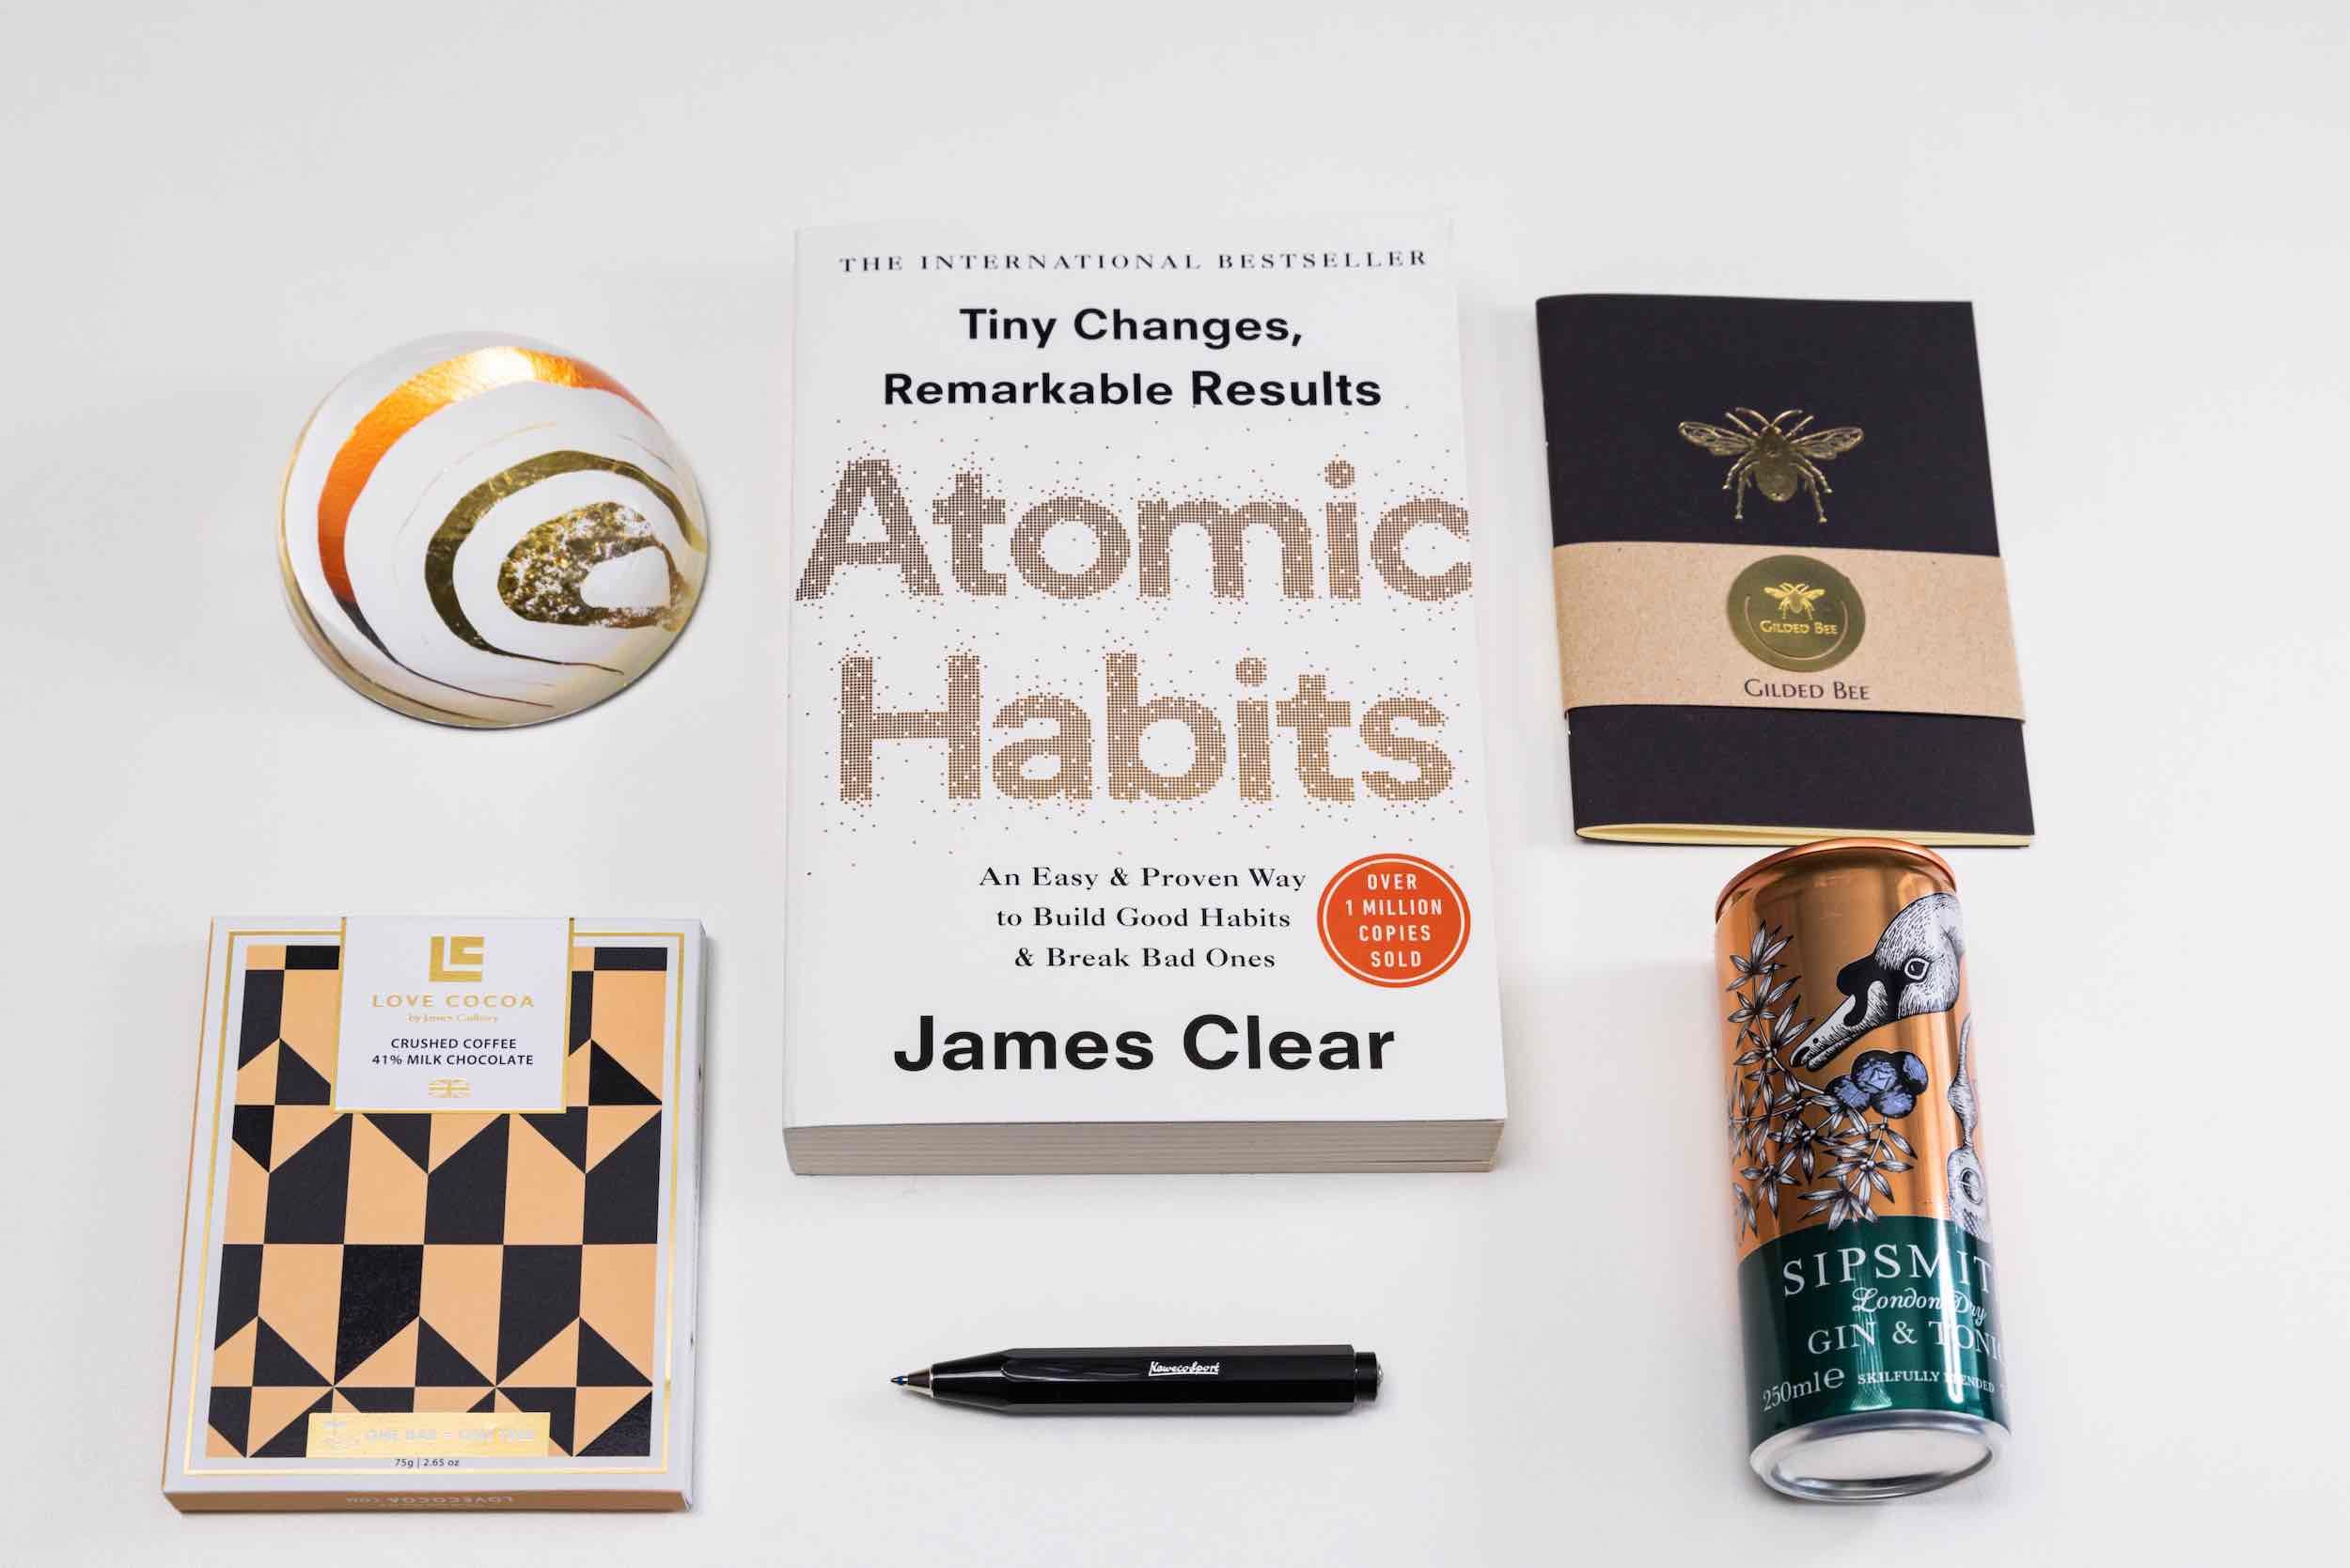 Christmas Employee Gifts with Atomic Habits book by James Clear, Sipsmith G&T and a Gilded Bee notebook